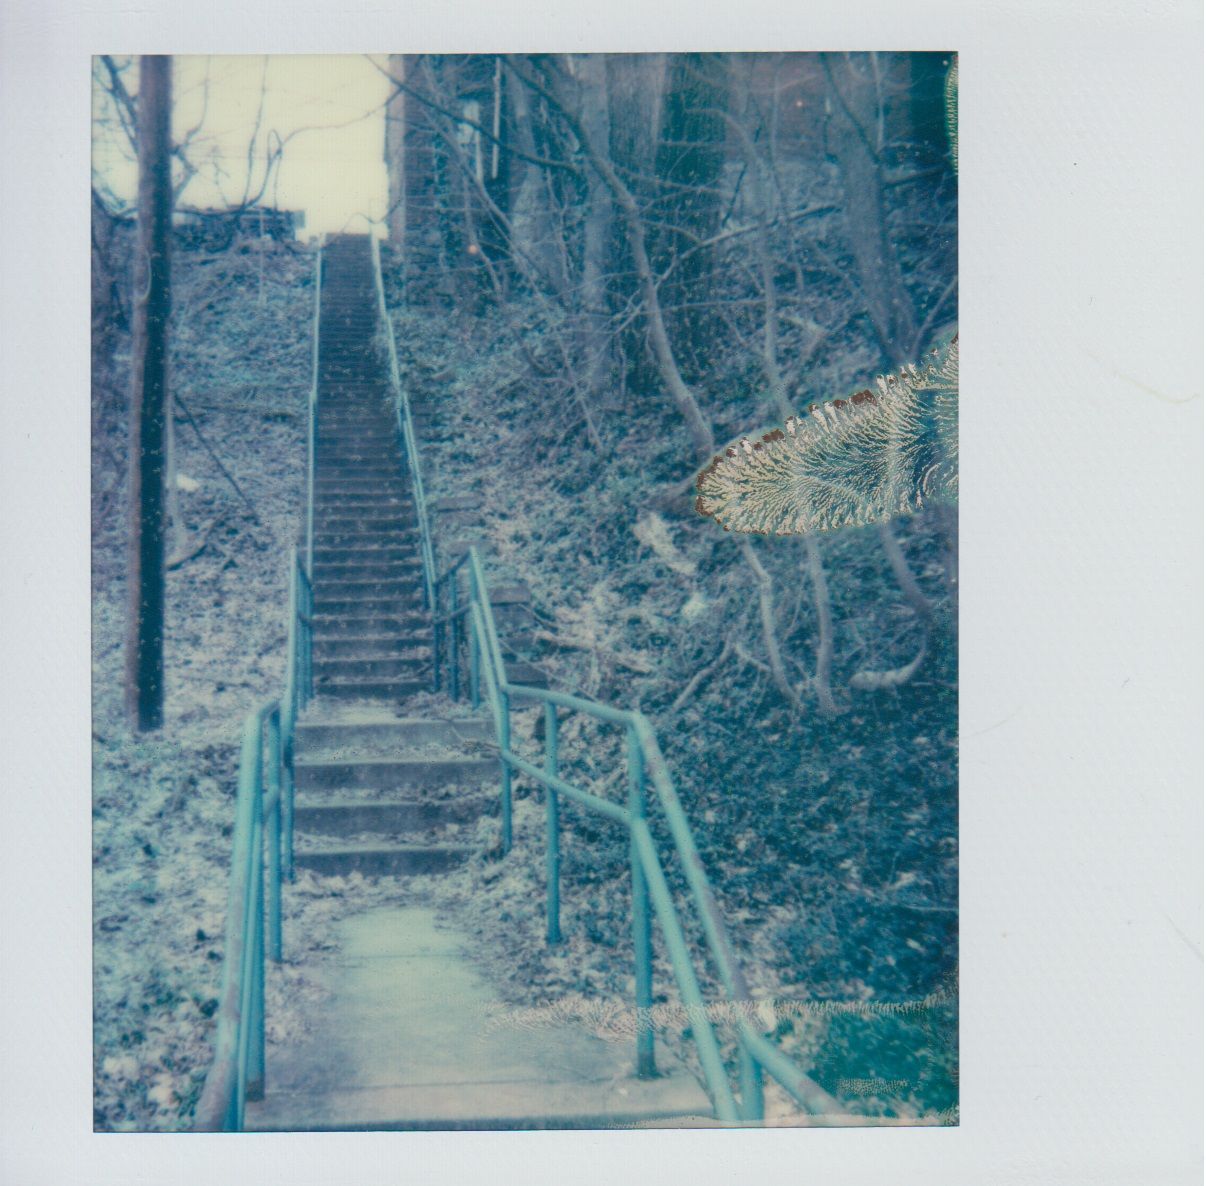 Interview: Laura Zurowski (Mis-steps) on Making Art About the Iconic Public Stairways of Pittsburgh